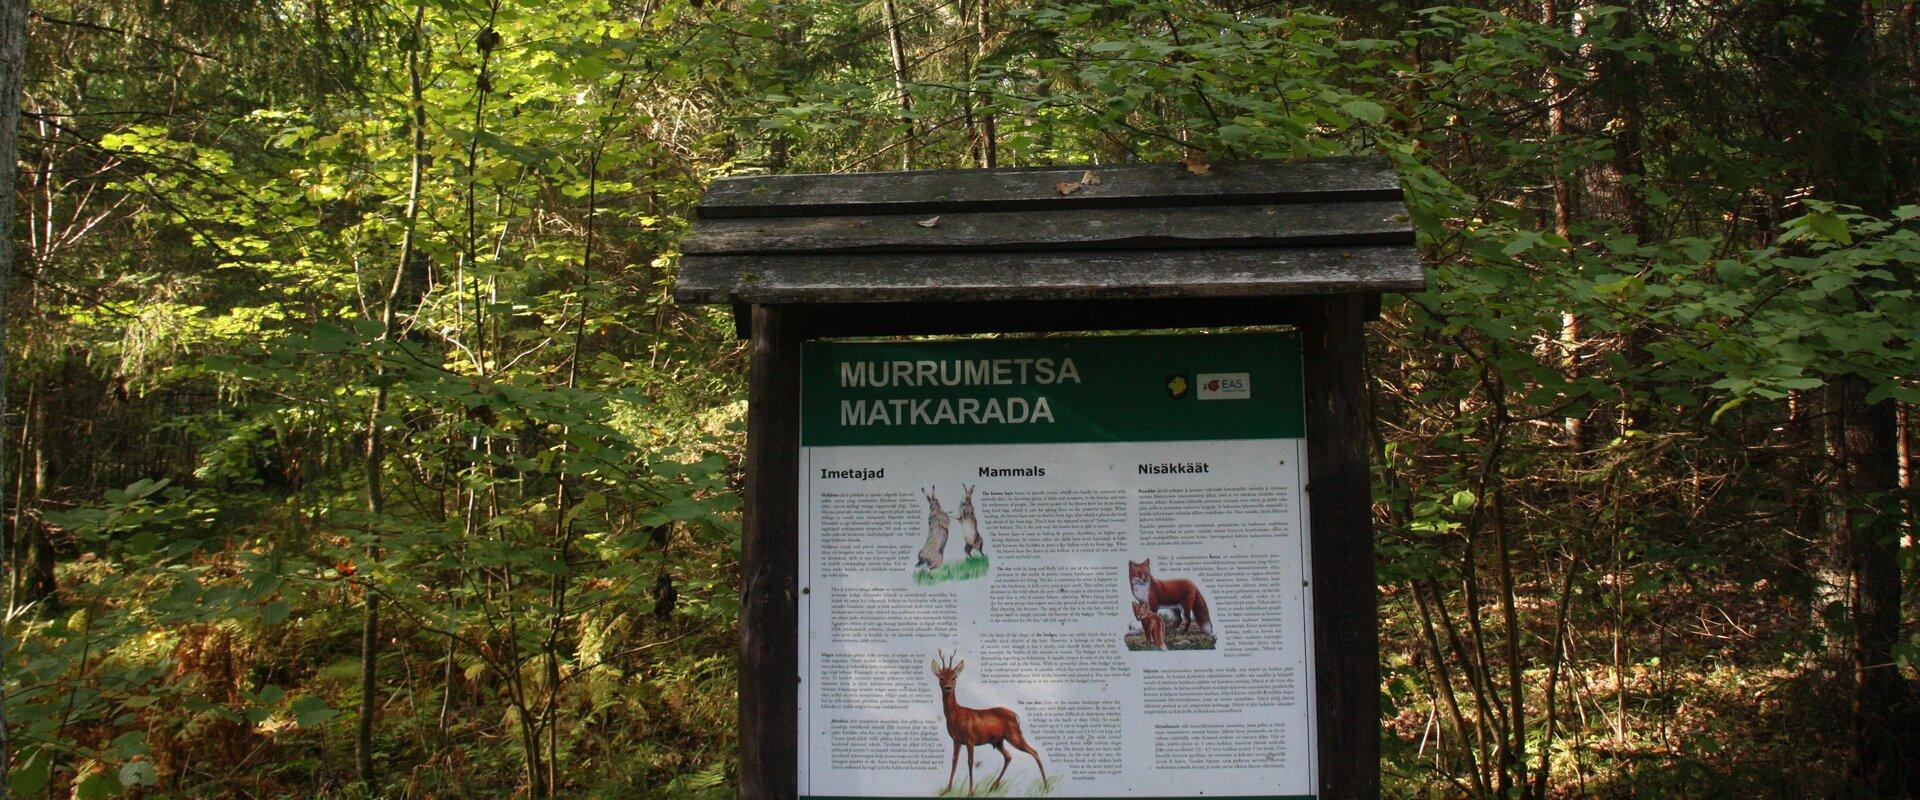 Murrumets Hiking Track starts from the Pühajärv Manor Park, runs through Murrumets Forest and back to the park. It takes about 1-1.5 hours to pass the